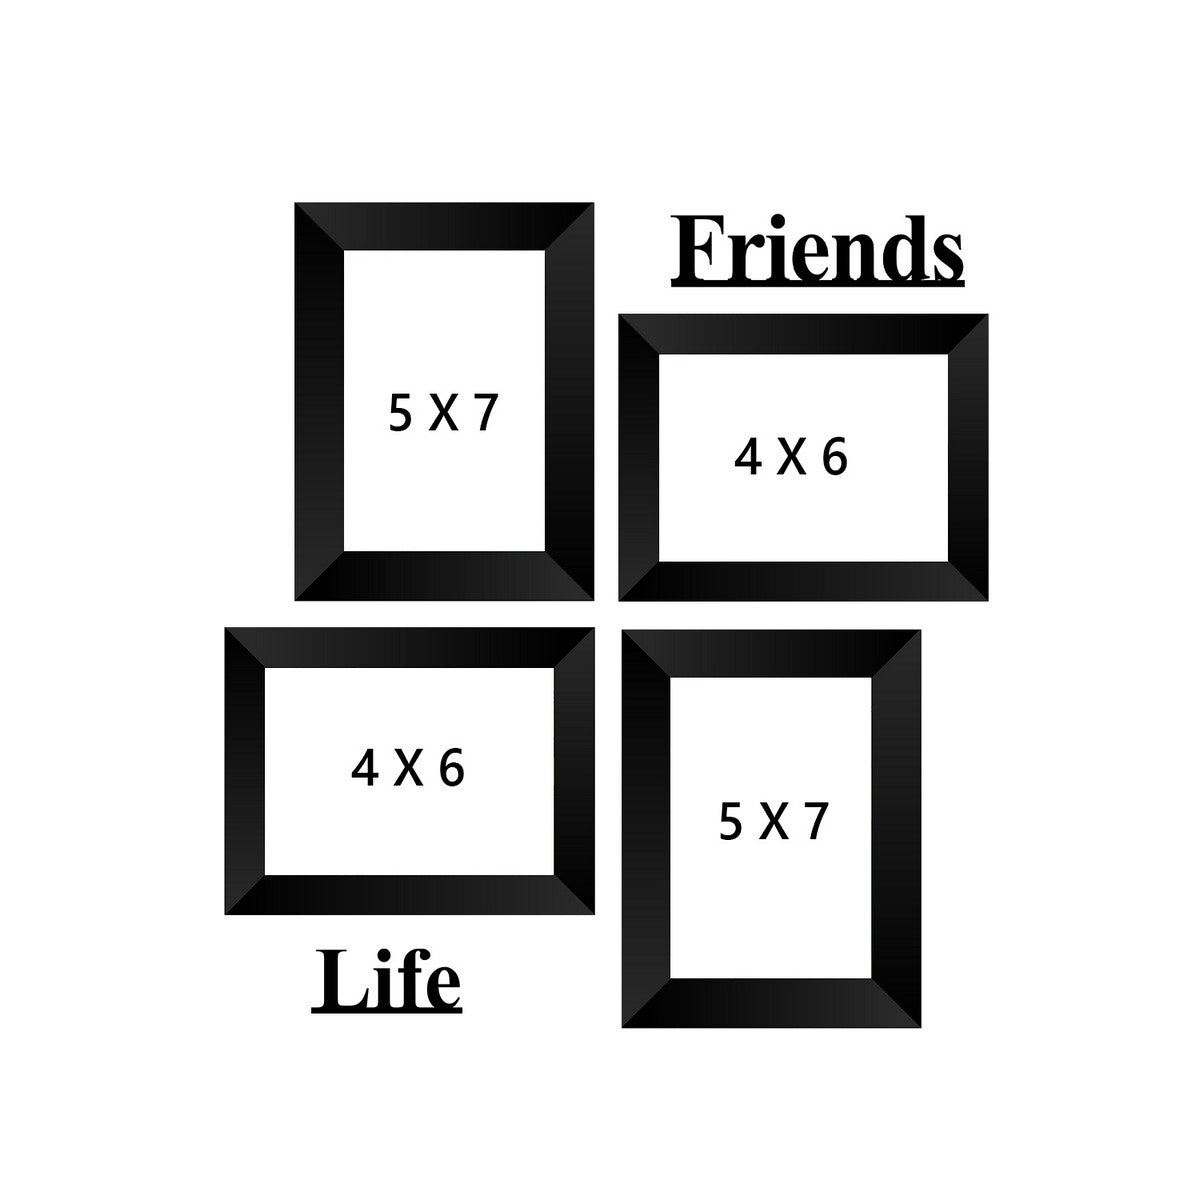 Memory Wall Collage Photo Frame - Set of 4 Photo Frames for 2 Photos of 5"x7", 2 Photos of 4"x6", 1 Piece of FRIENDS, 1 Piece of LIFE 3